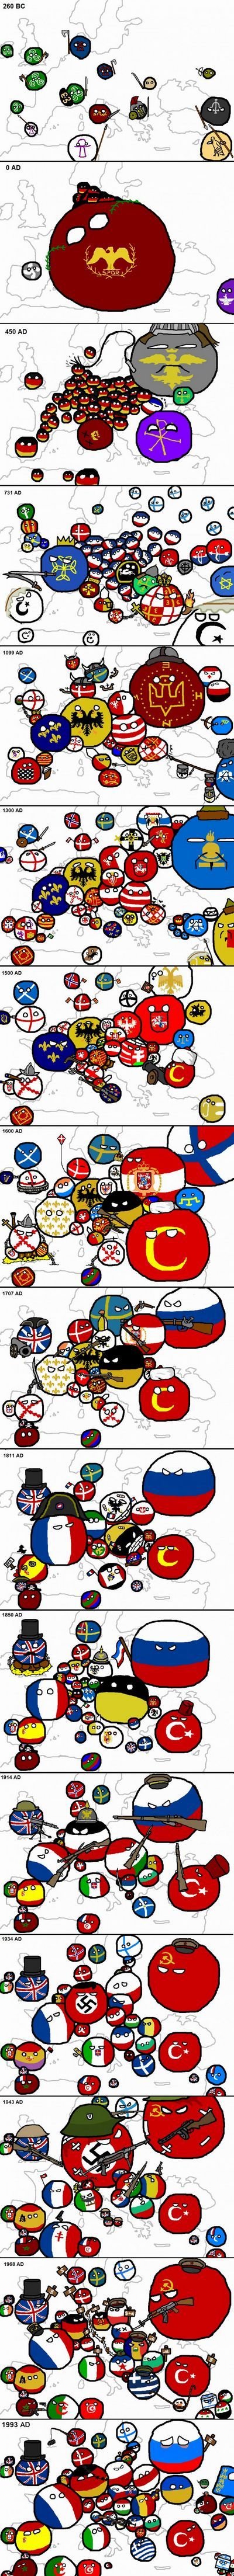 History of Europe. not mine, found it on facebook. DAD SAAD. Ok, I specialize in European history, and this was confusing as .